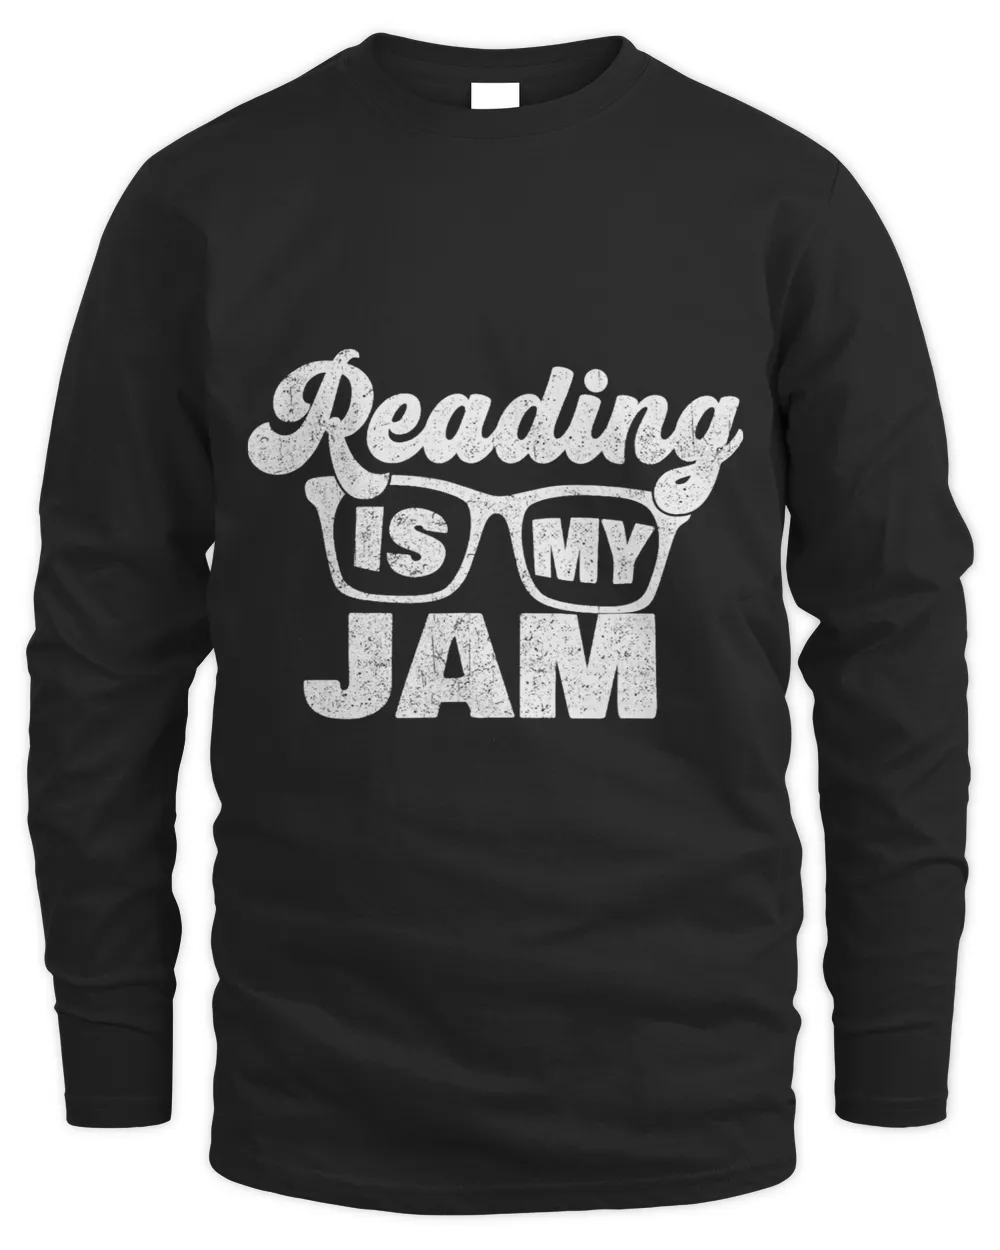 Reading Book Is My Jam Bookworm Library Librarian Book Reader